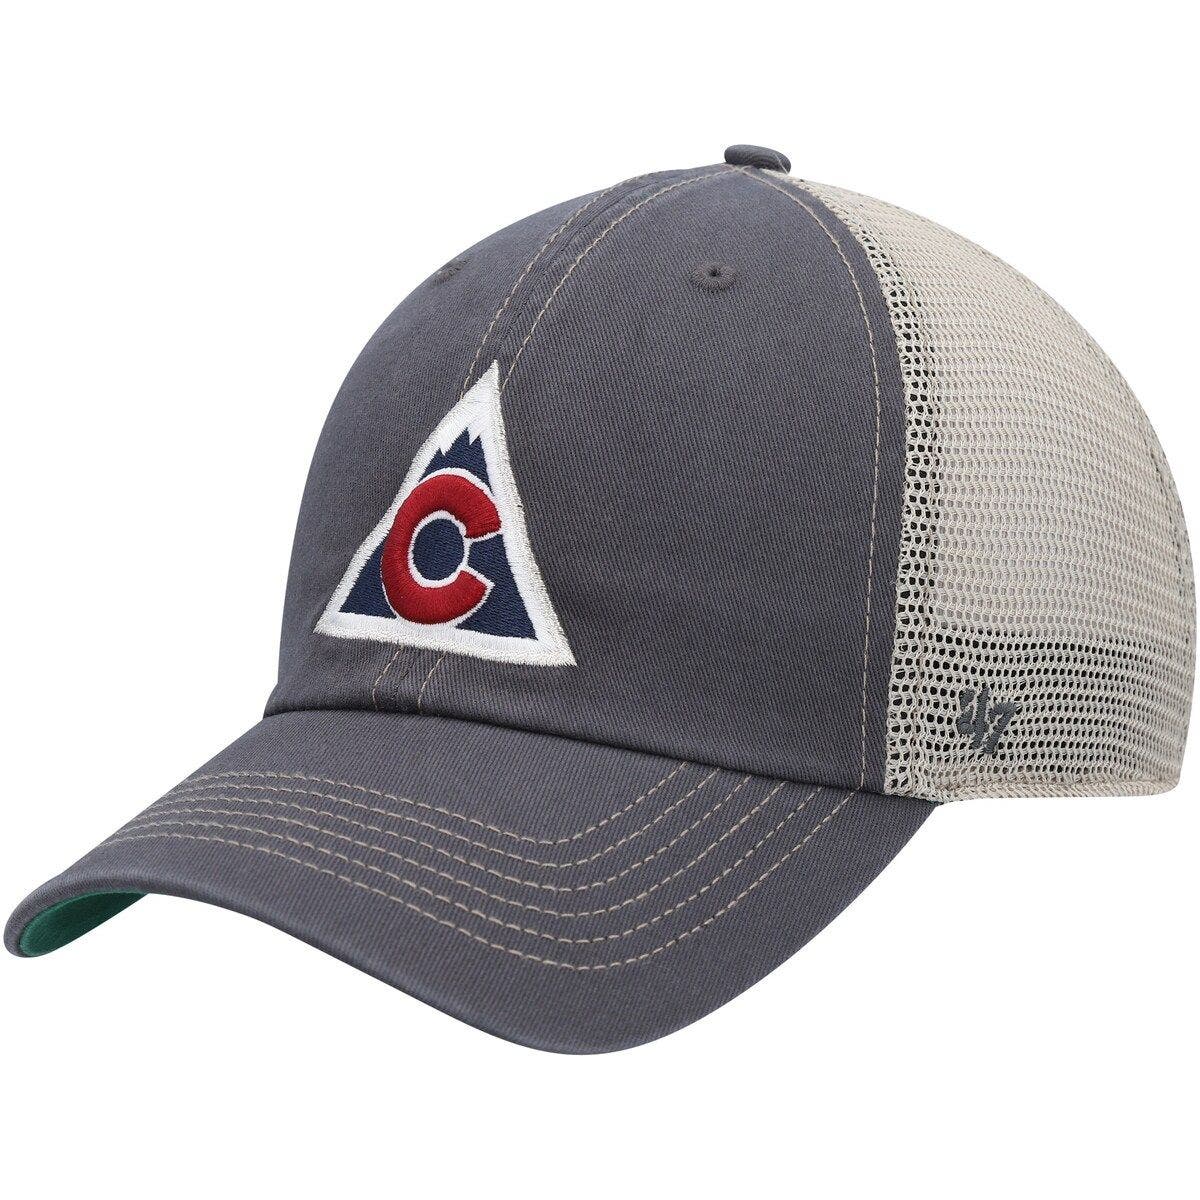 Men's '47 Burgundy Colorado Avalanche Franchise Fitted Hat